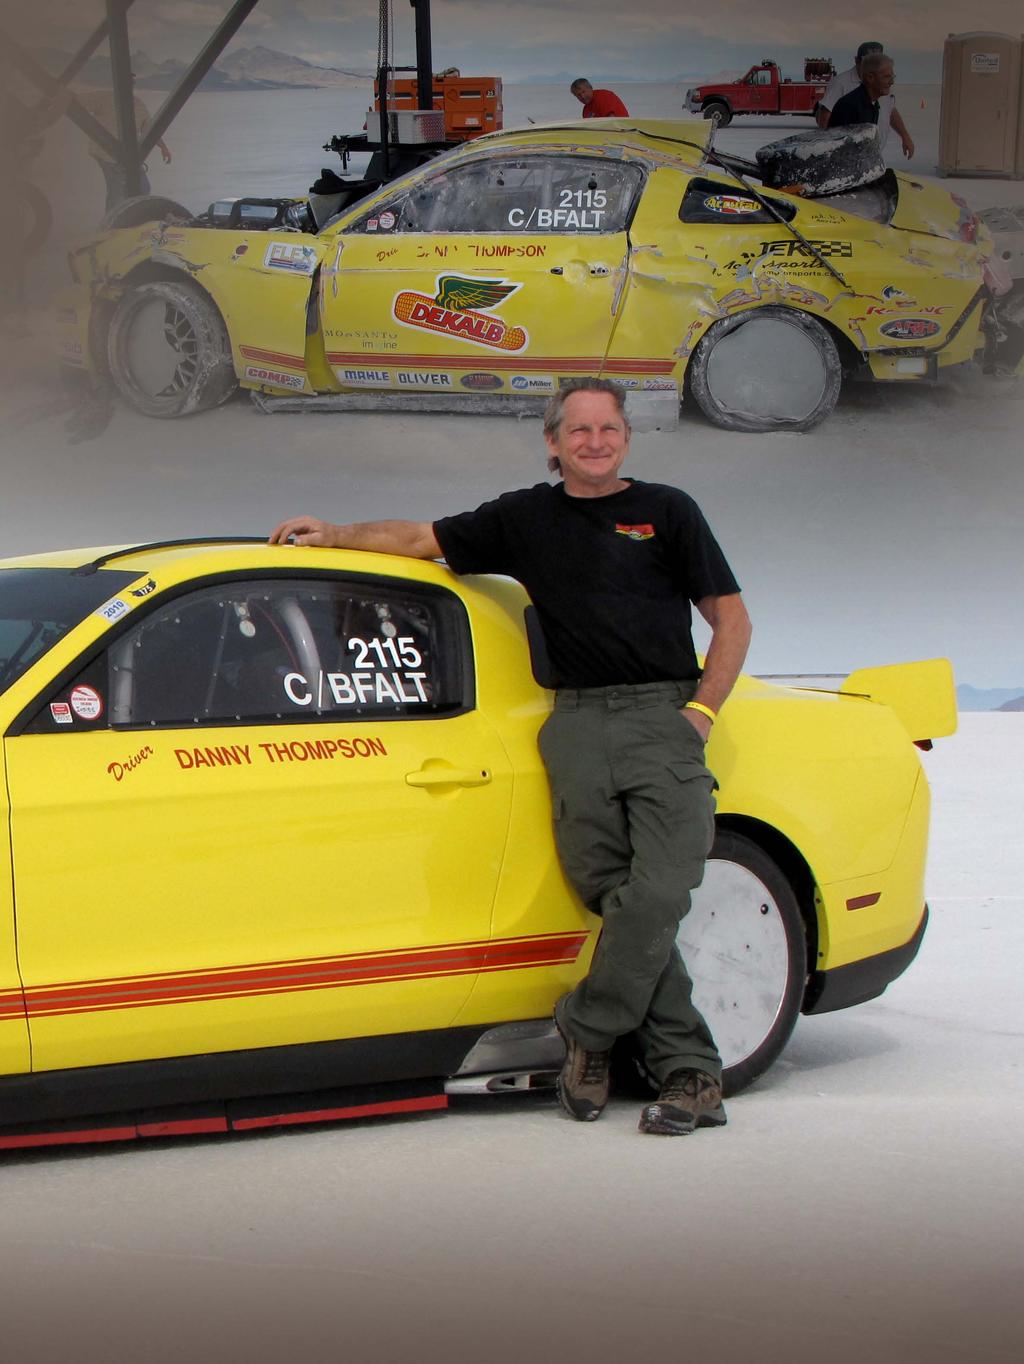 Danny was able to drive a Mustang 251 MPH at Bonneville in 2008. In 2010 he brought this car to beat that speed and lock it in with a back up run. Unfortunately, at 264.